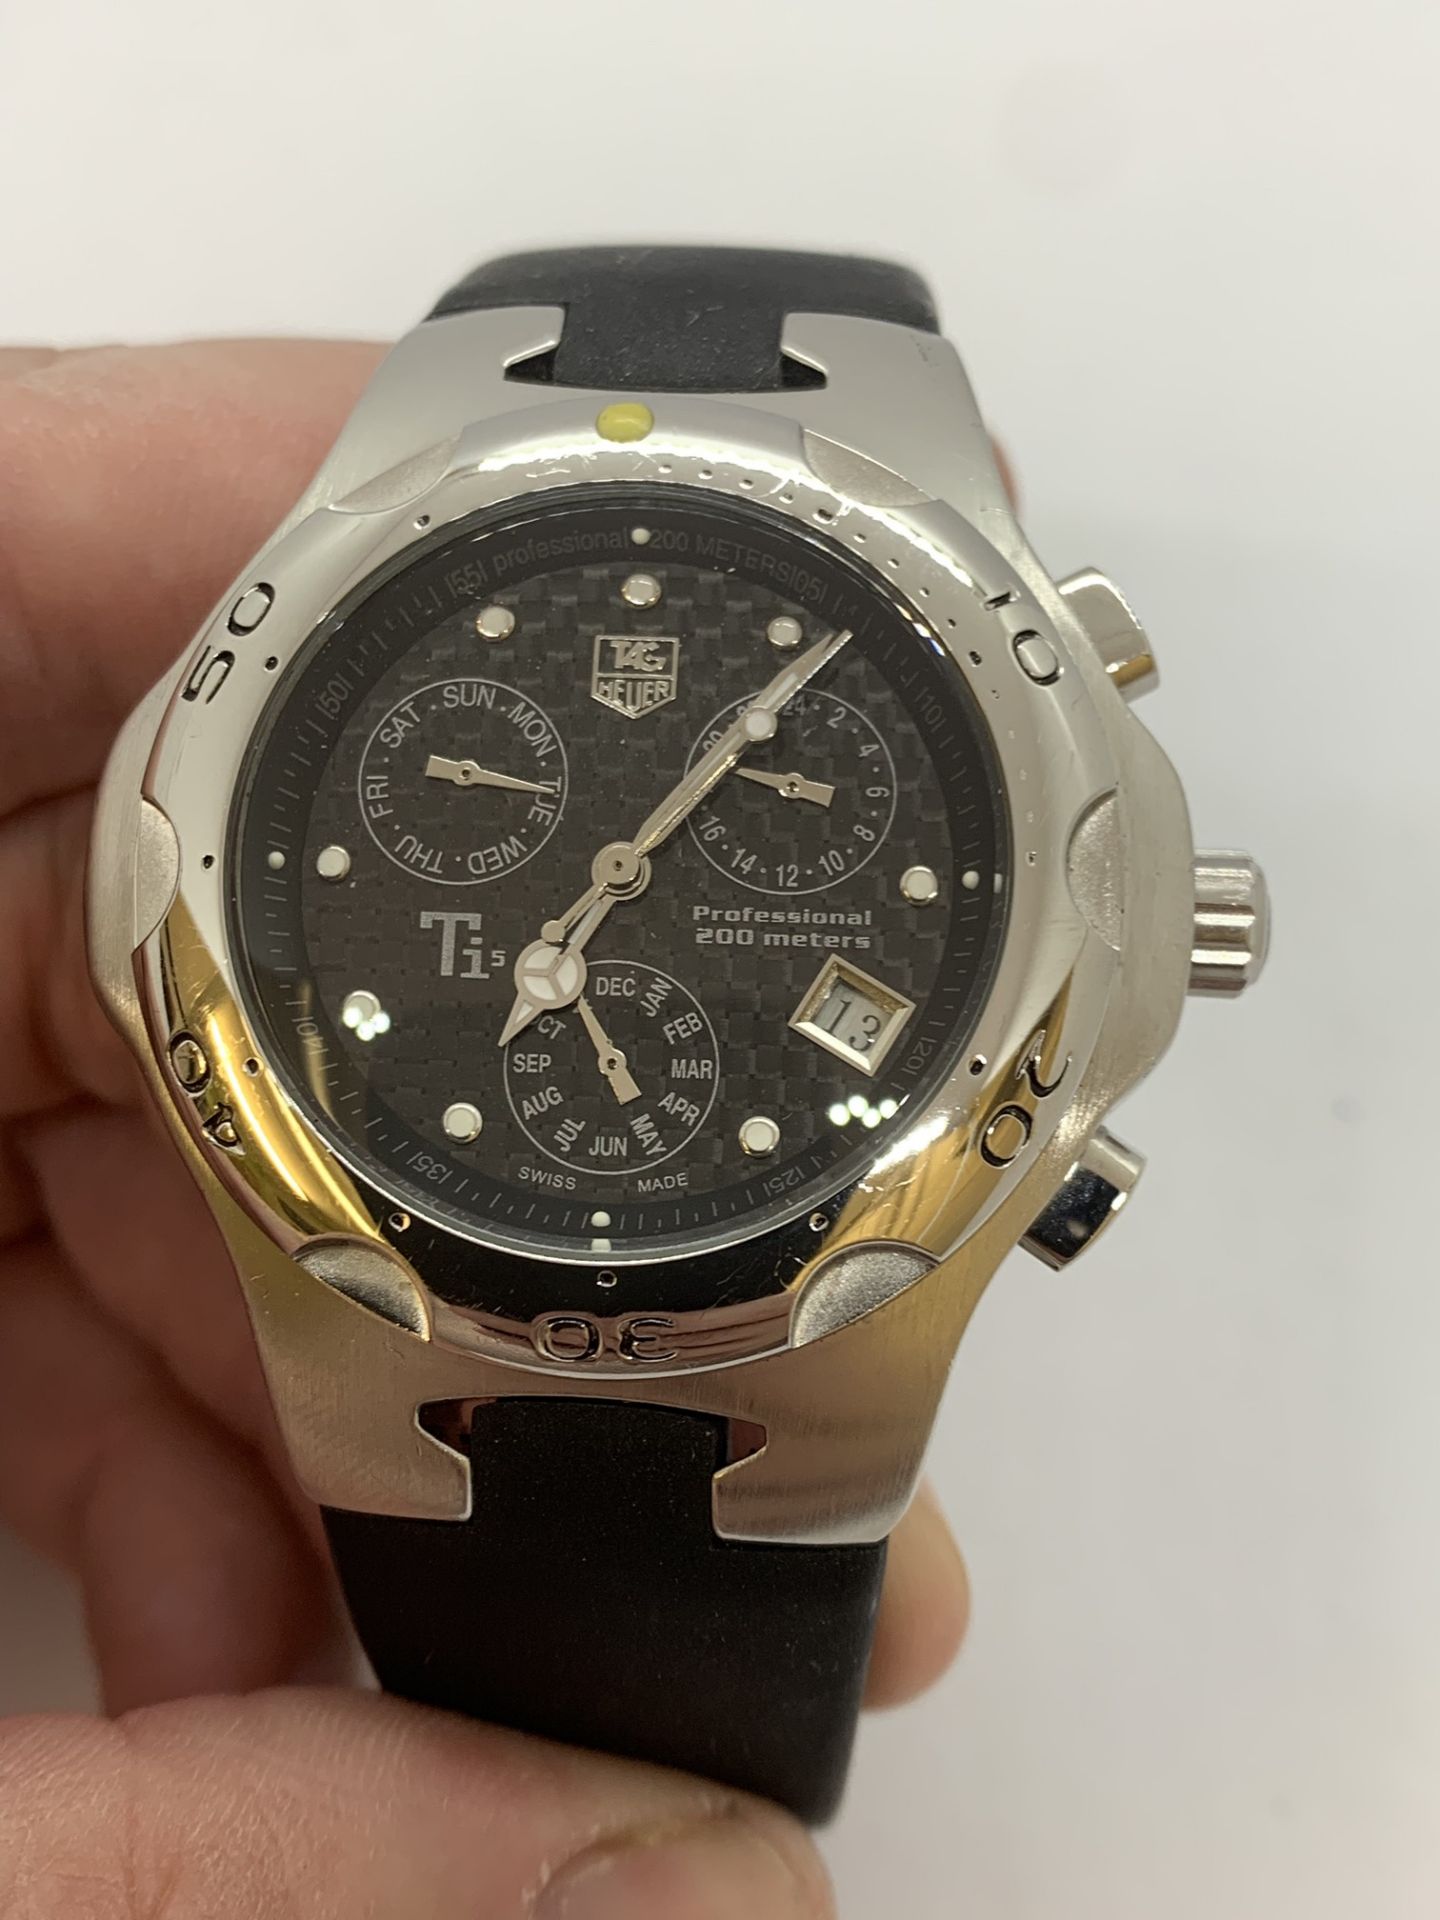 TAG HEUER PROFESSIONAL CHRONO AUTOMATIC WATCH - 200 METERS - Image 9 of 11